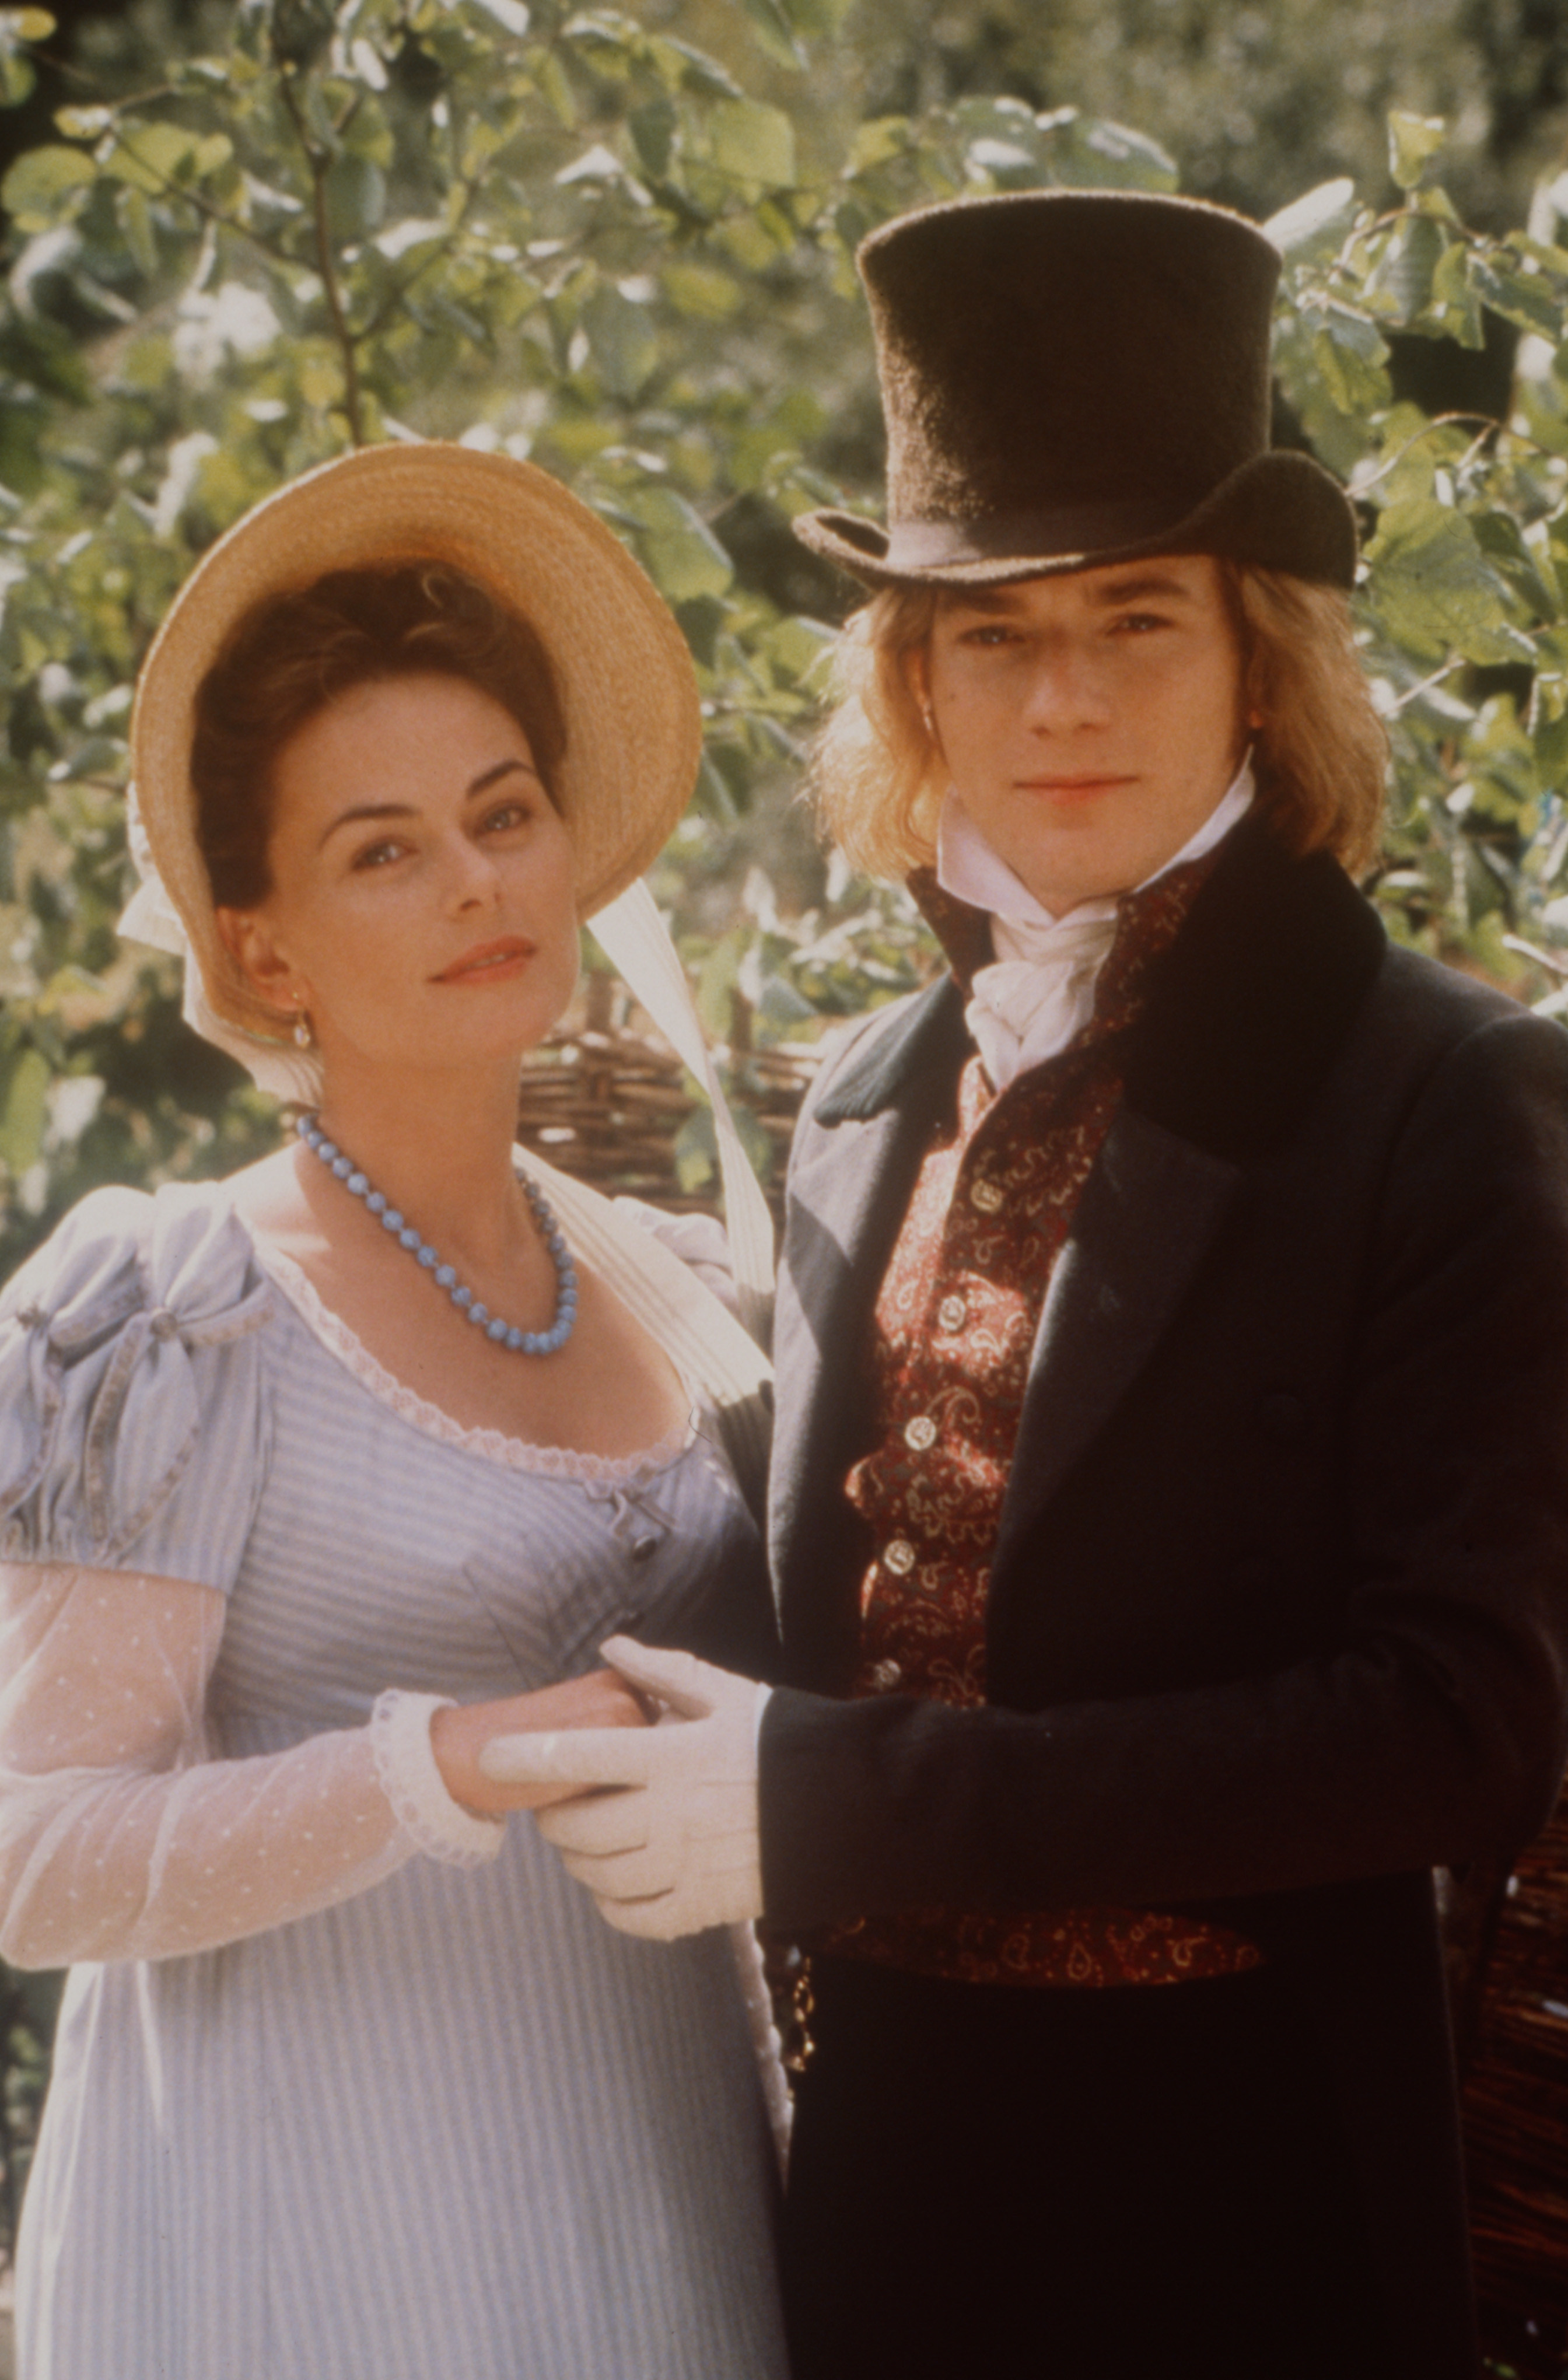 Jane and Frank in the film